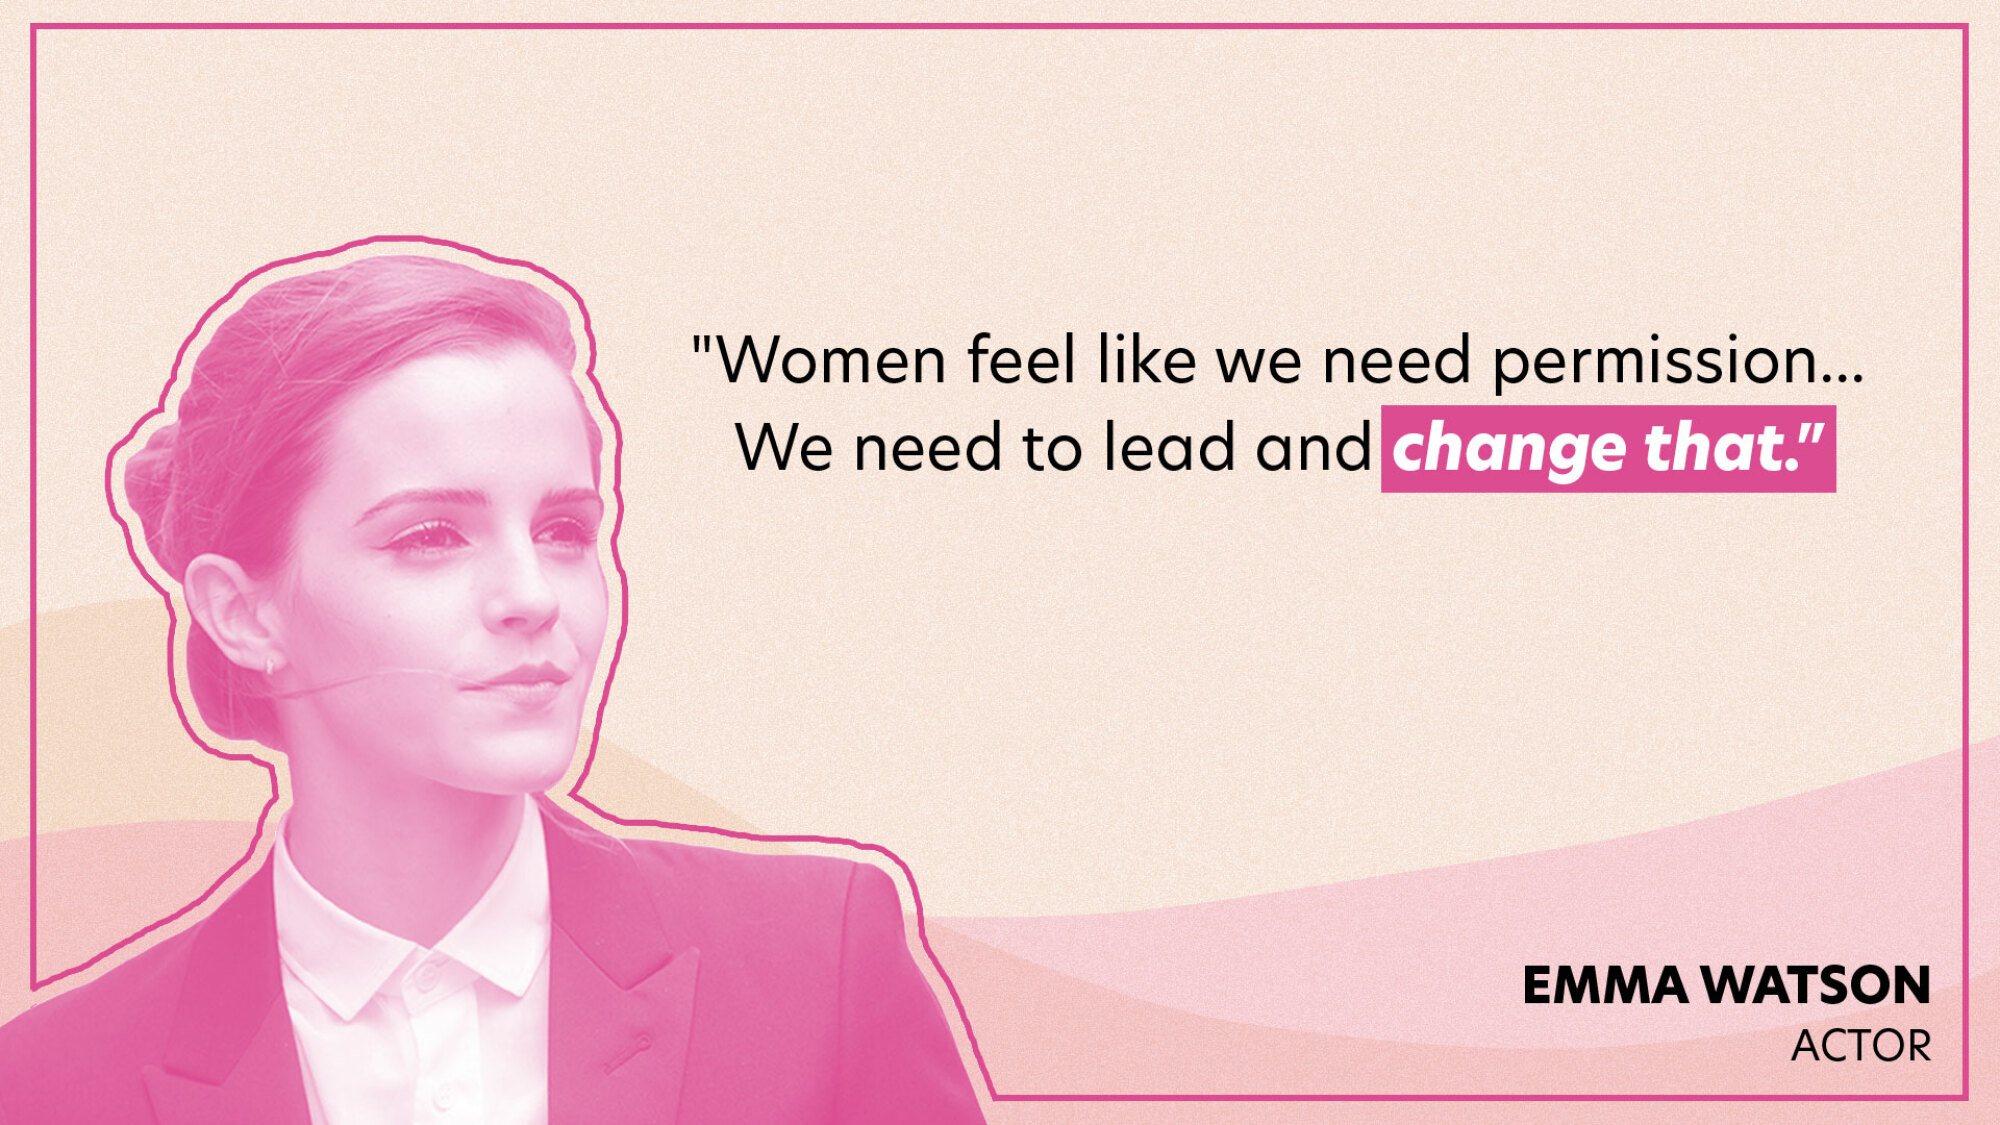 "Women feel like we need permission... We need to lead and change that."